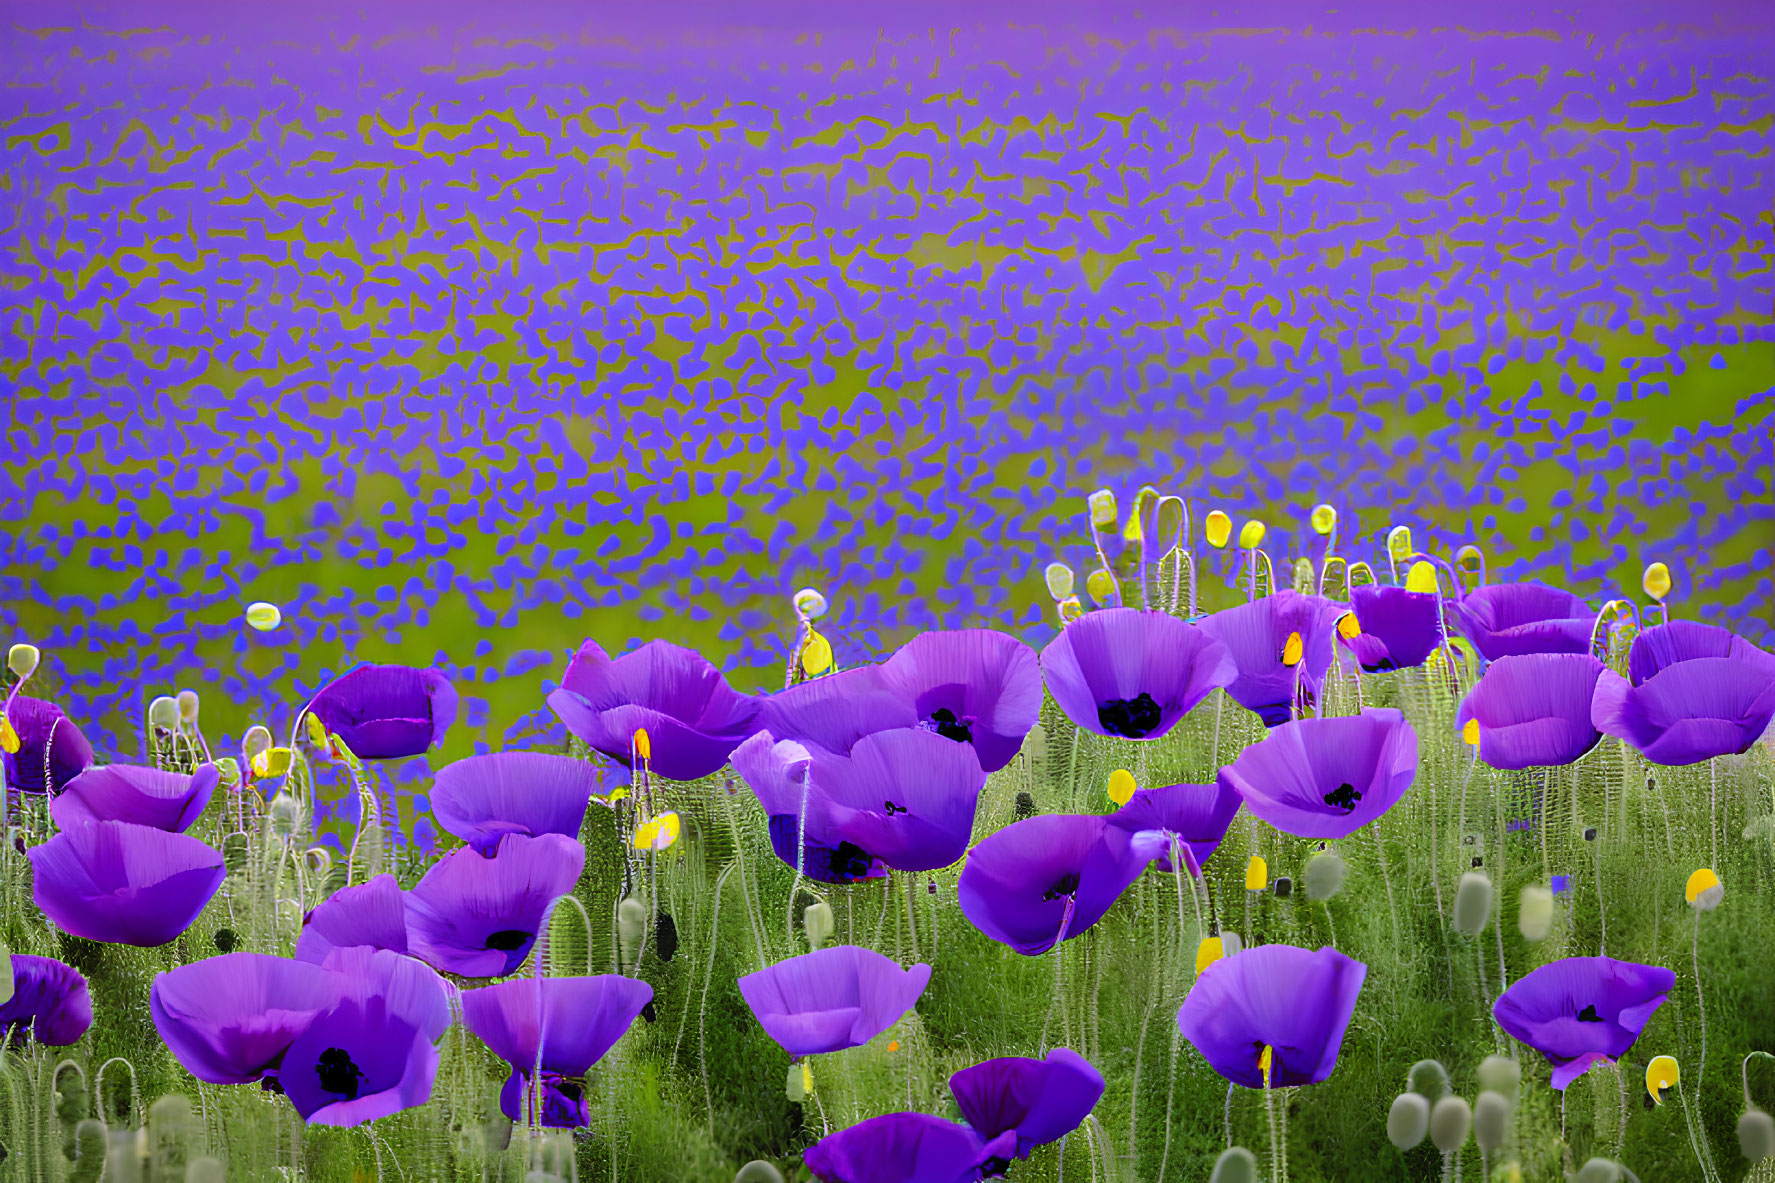 Colorful Purple Poppy Field on Textured Lilac Background